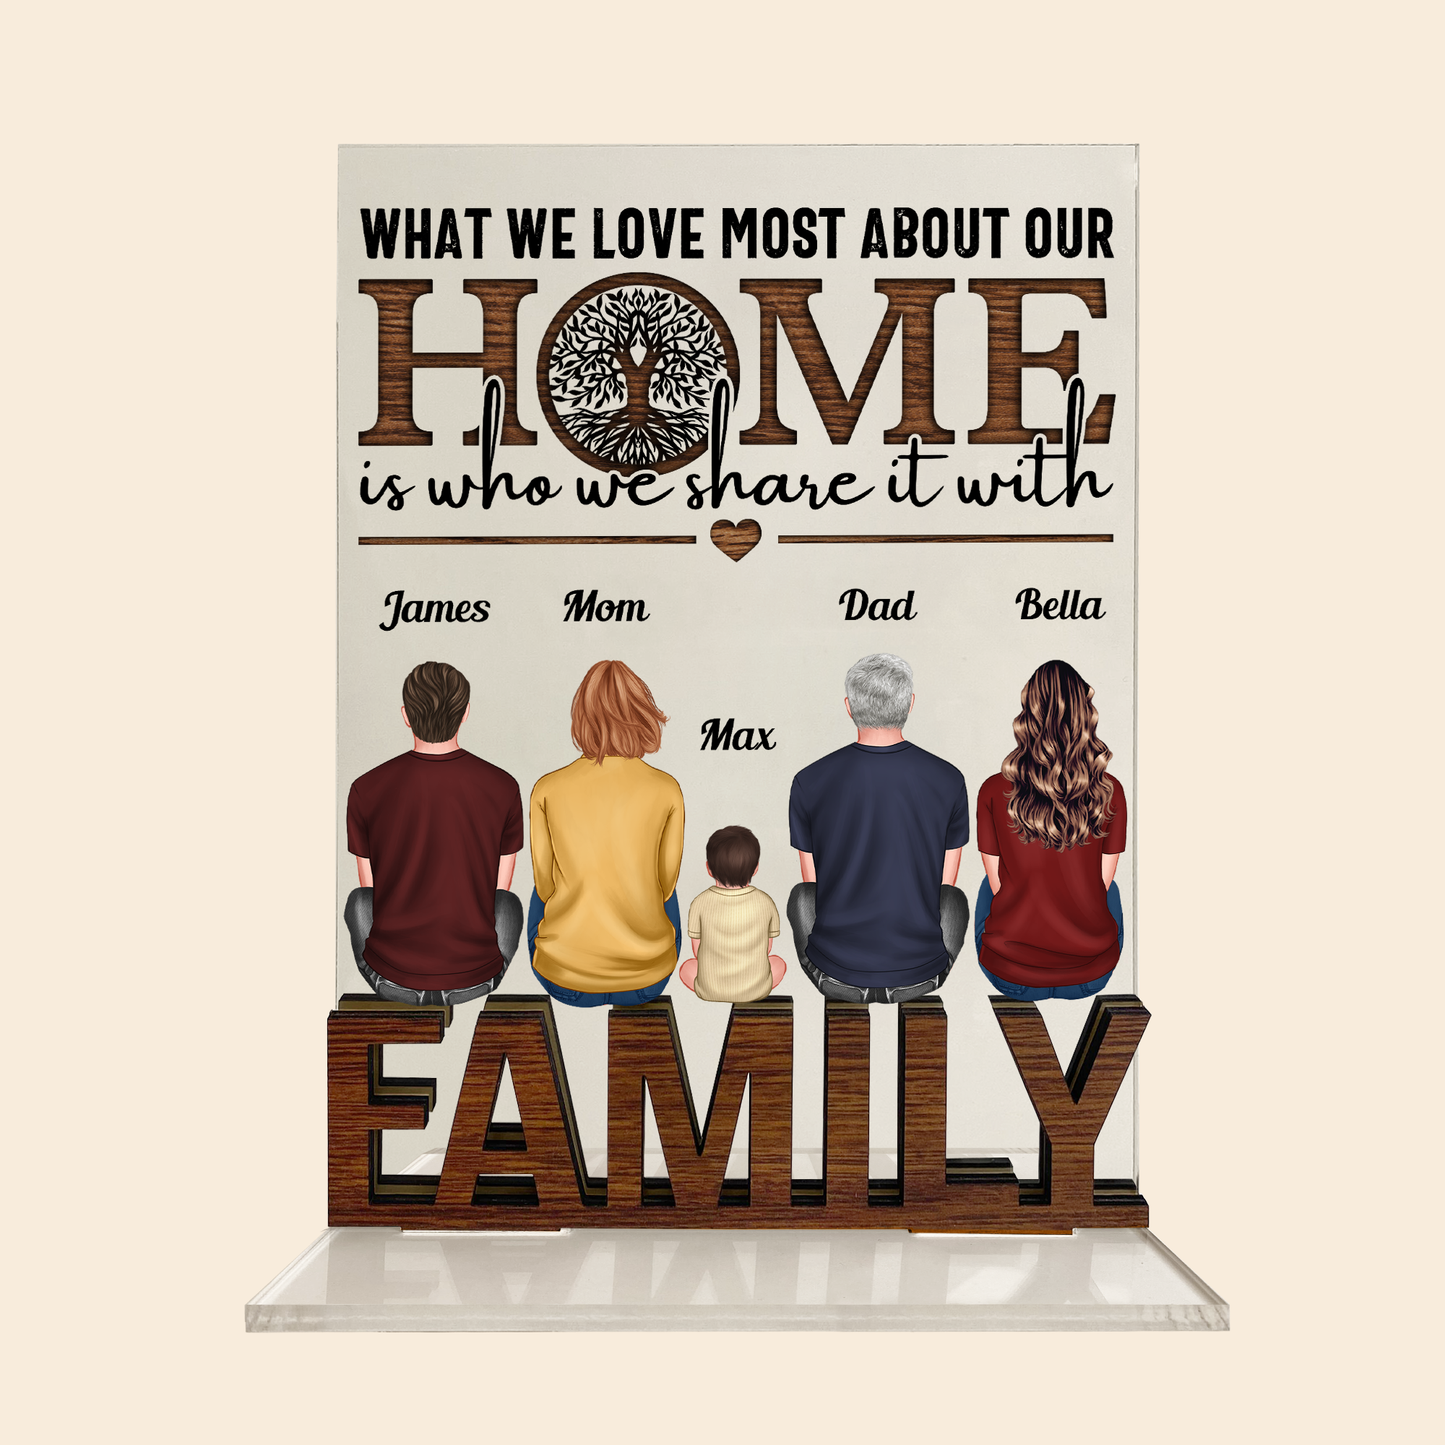 Our Home Is Who We Share It With - Personalized Acrylic Plaque With Standing Wood Letters - Birthday, Heartwarming Gift For Dad, Papa, Mom, Grandparents, Family Members